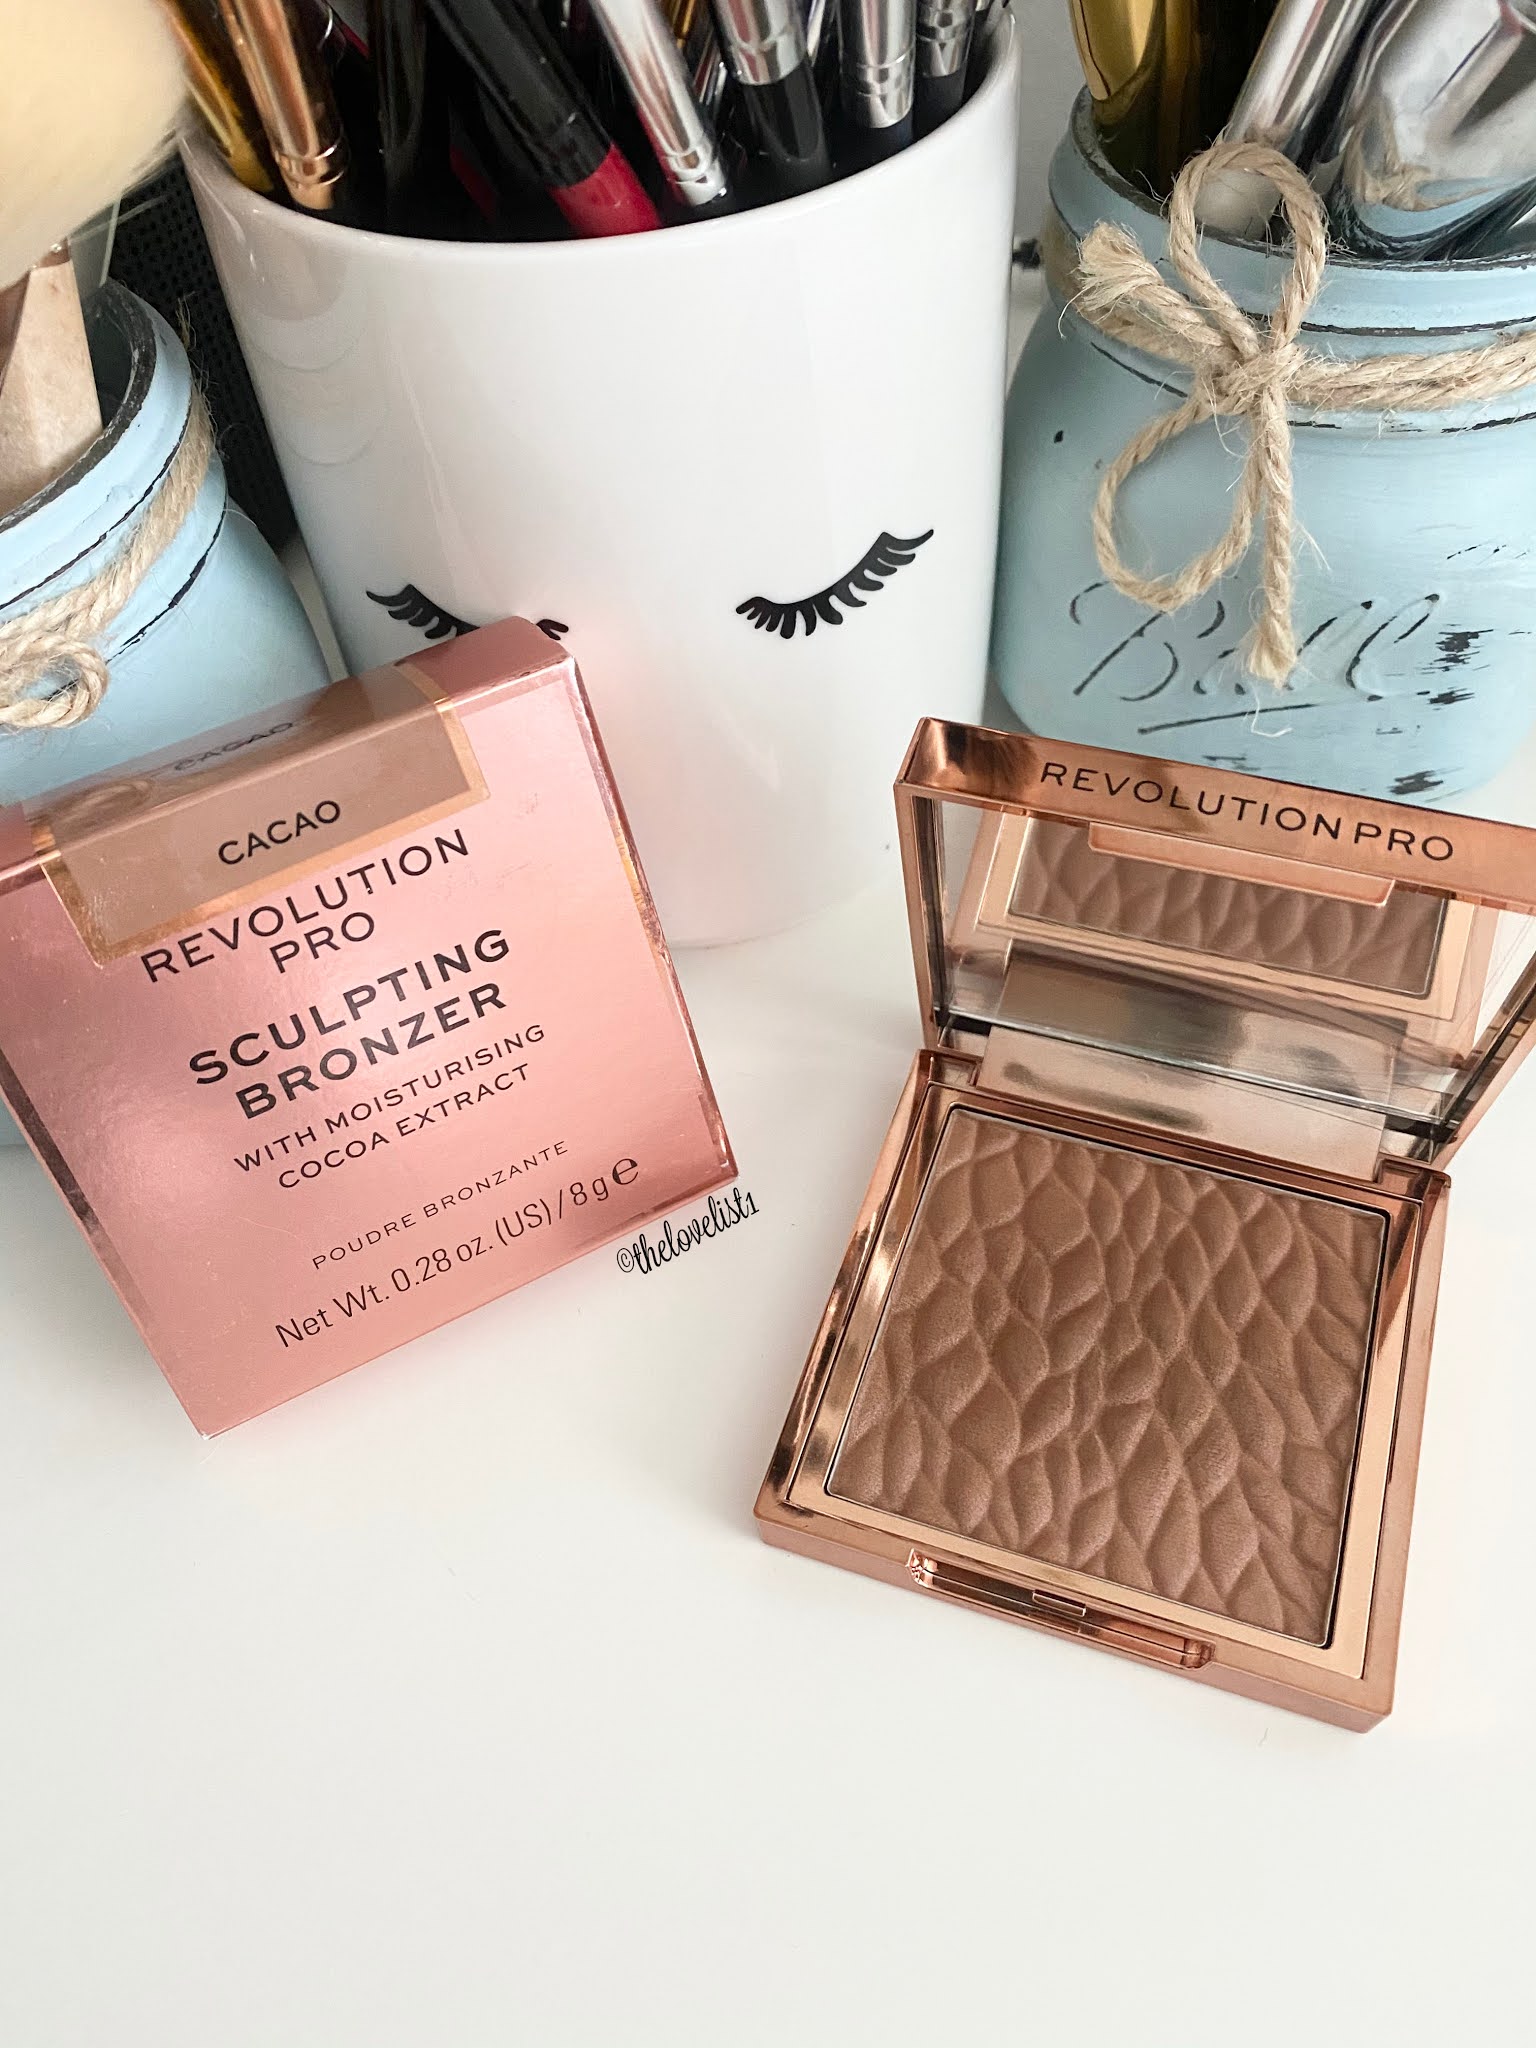 BATTLE OF THE BRONZERS